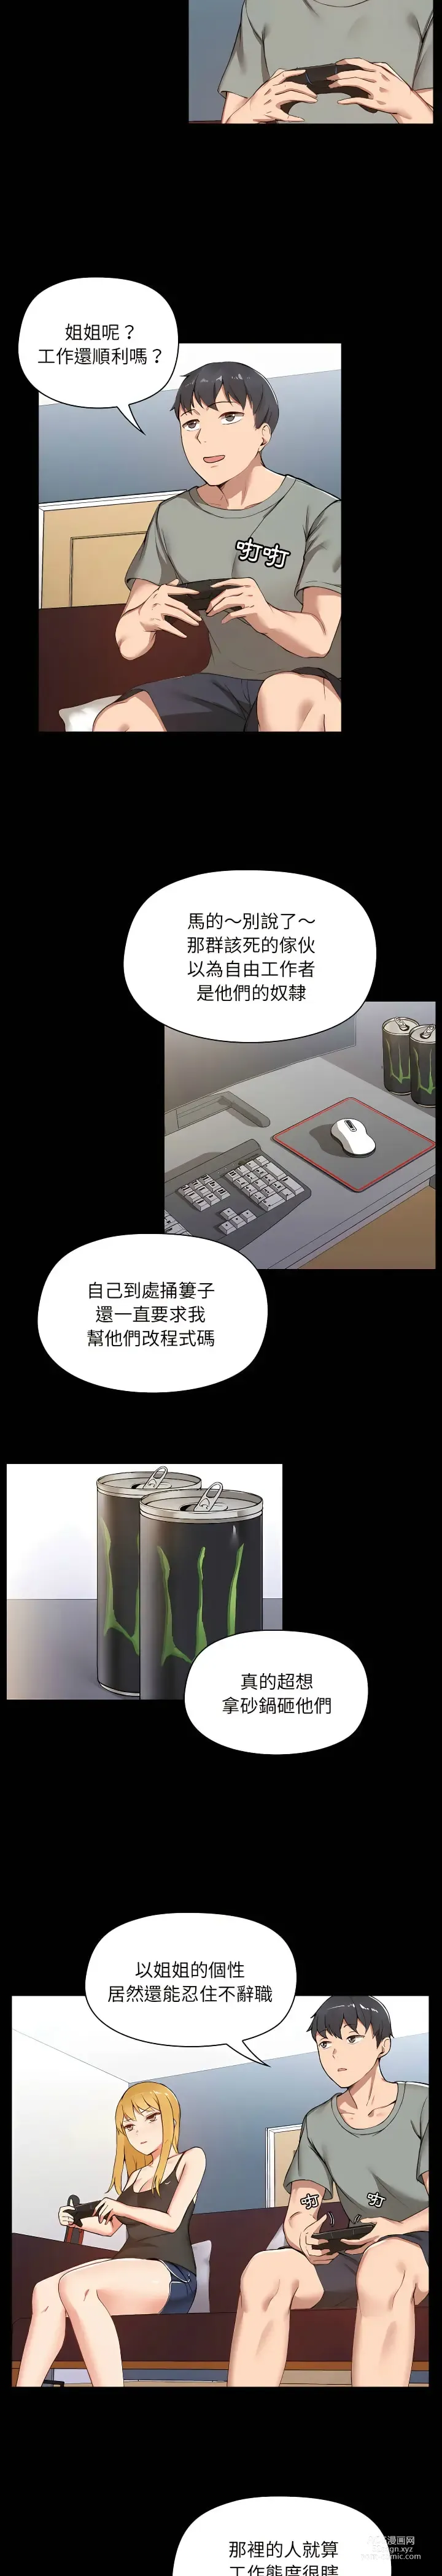 Page 9 of manga 爱打游戏的姐姐／All About That Game Life